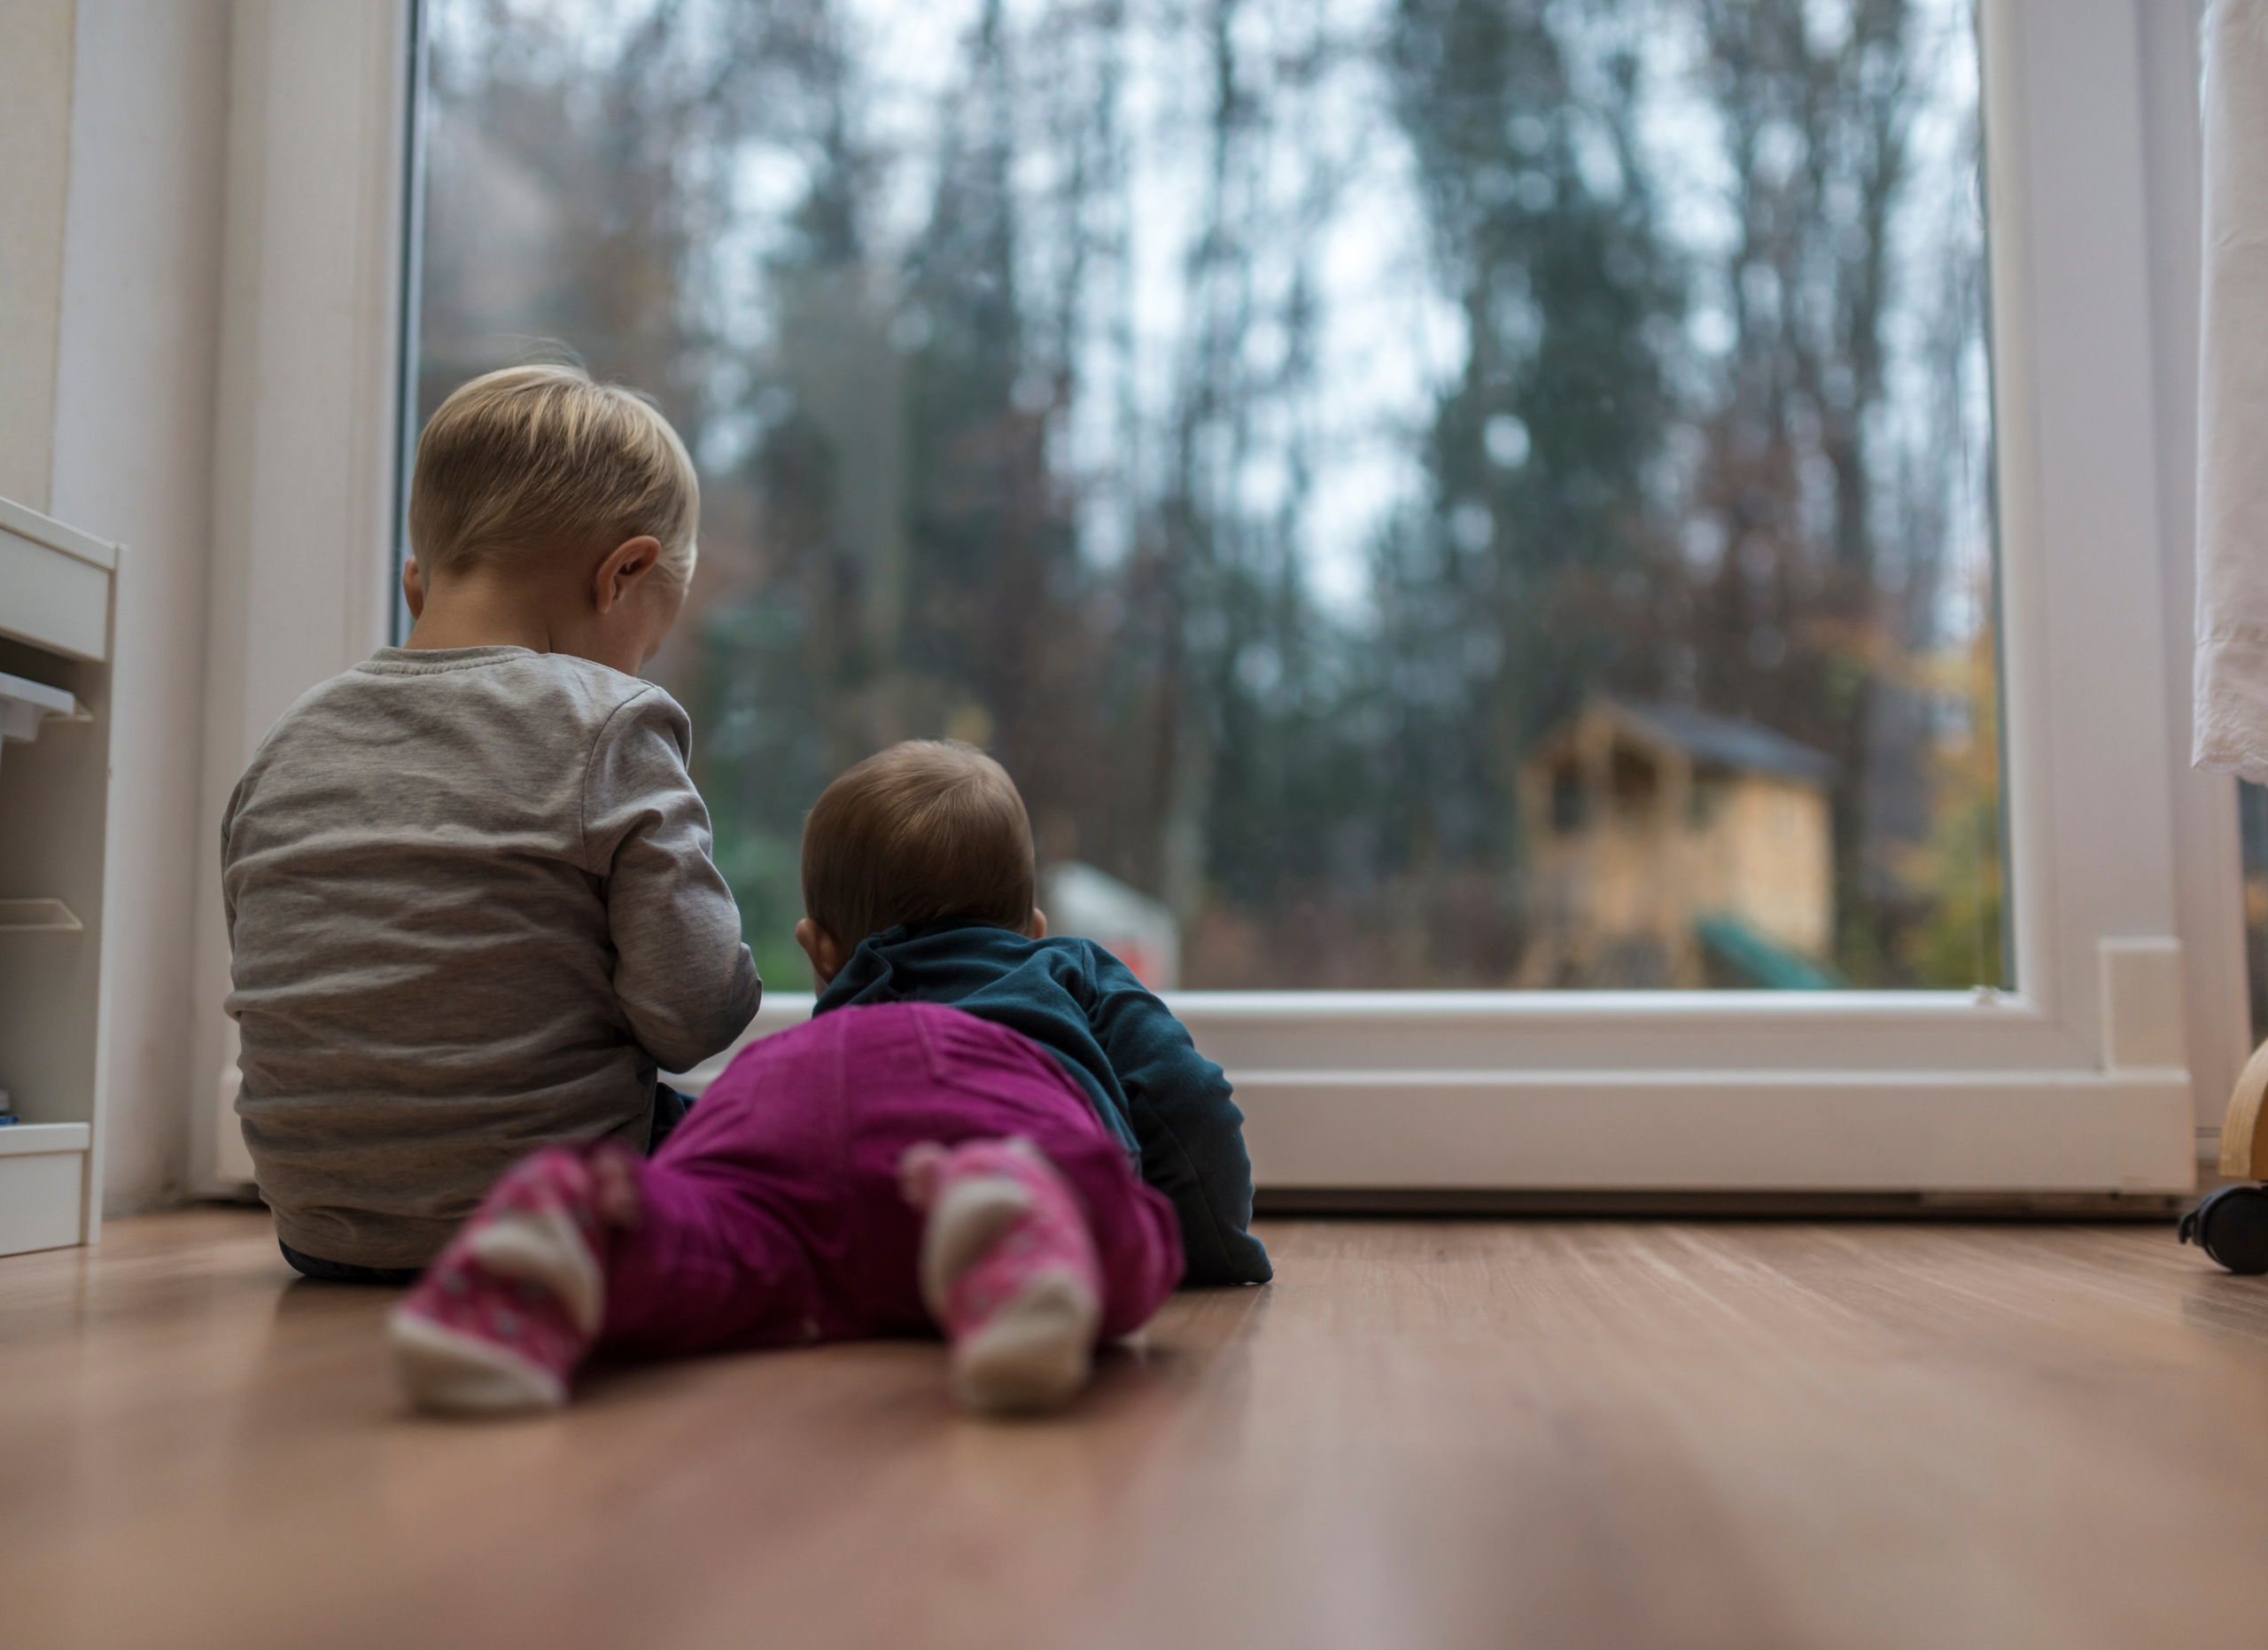 10 ways to spend a rainy day indoors with kids